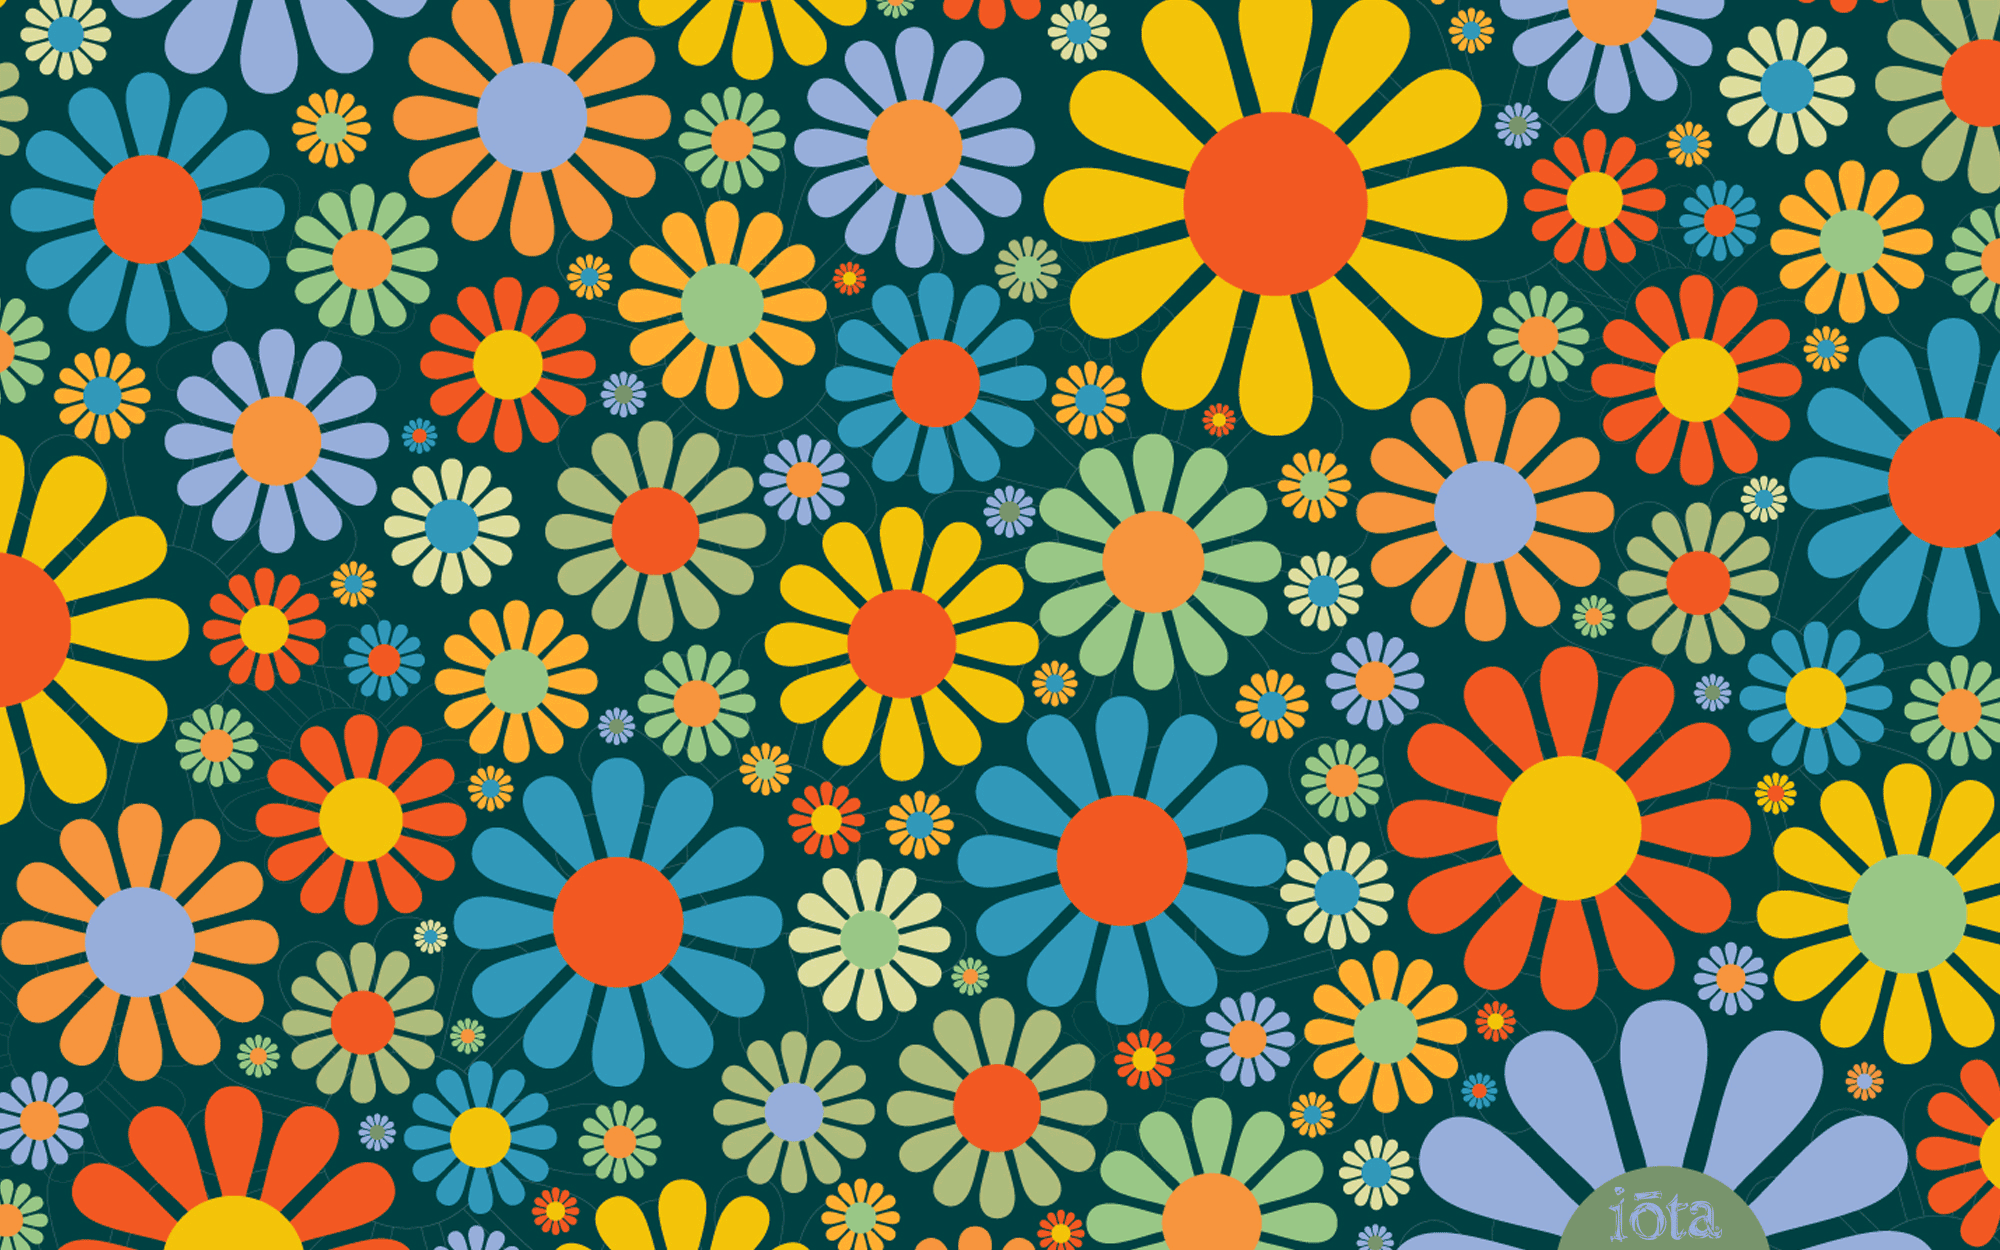 Premium Vector  Seamless pattern with colorful groovy flowers and smiling  faces 70s 80s 90s polka dot background